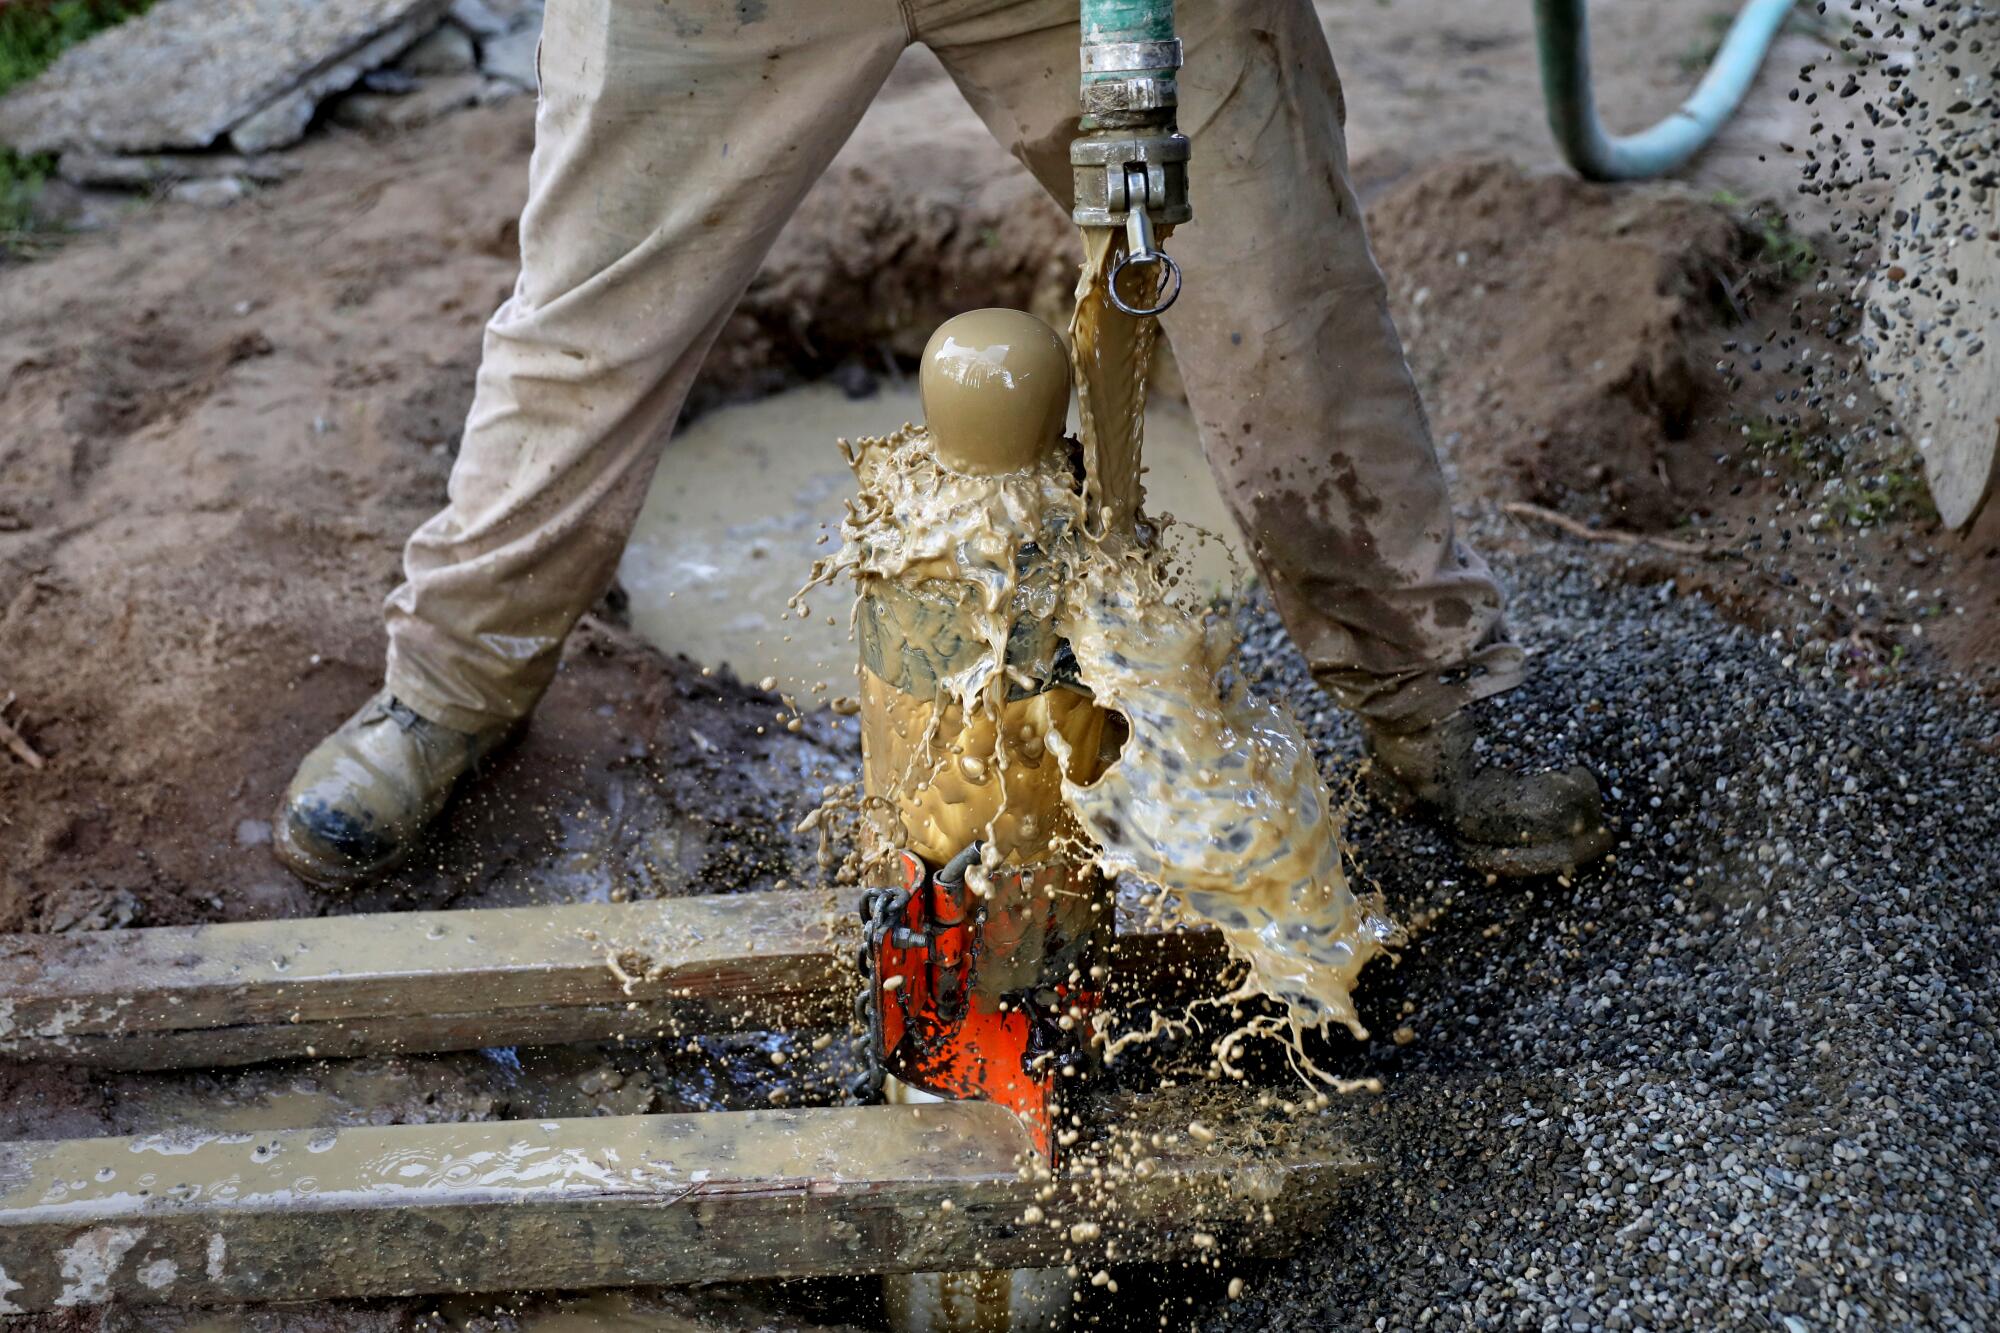 A worker places gravel around a newly drilled well.